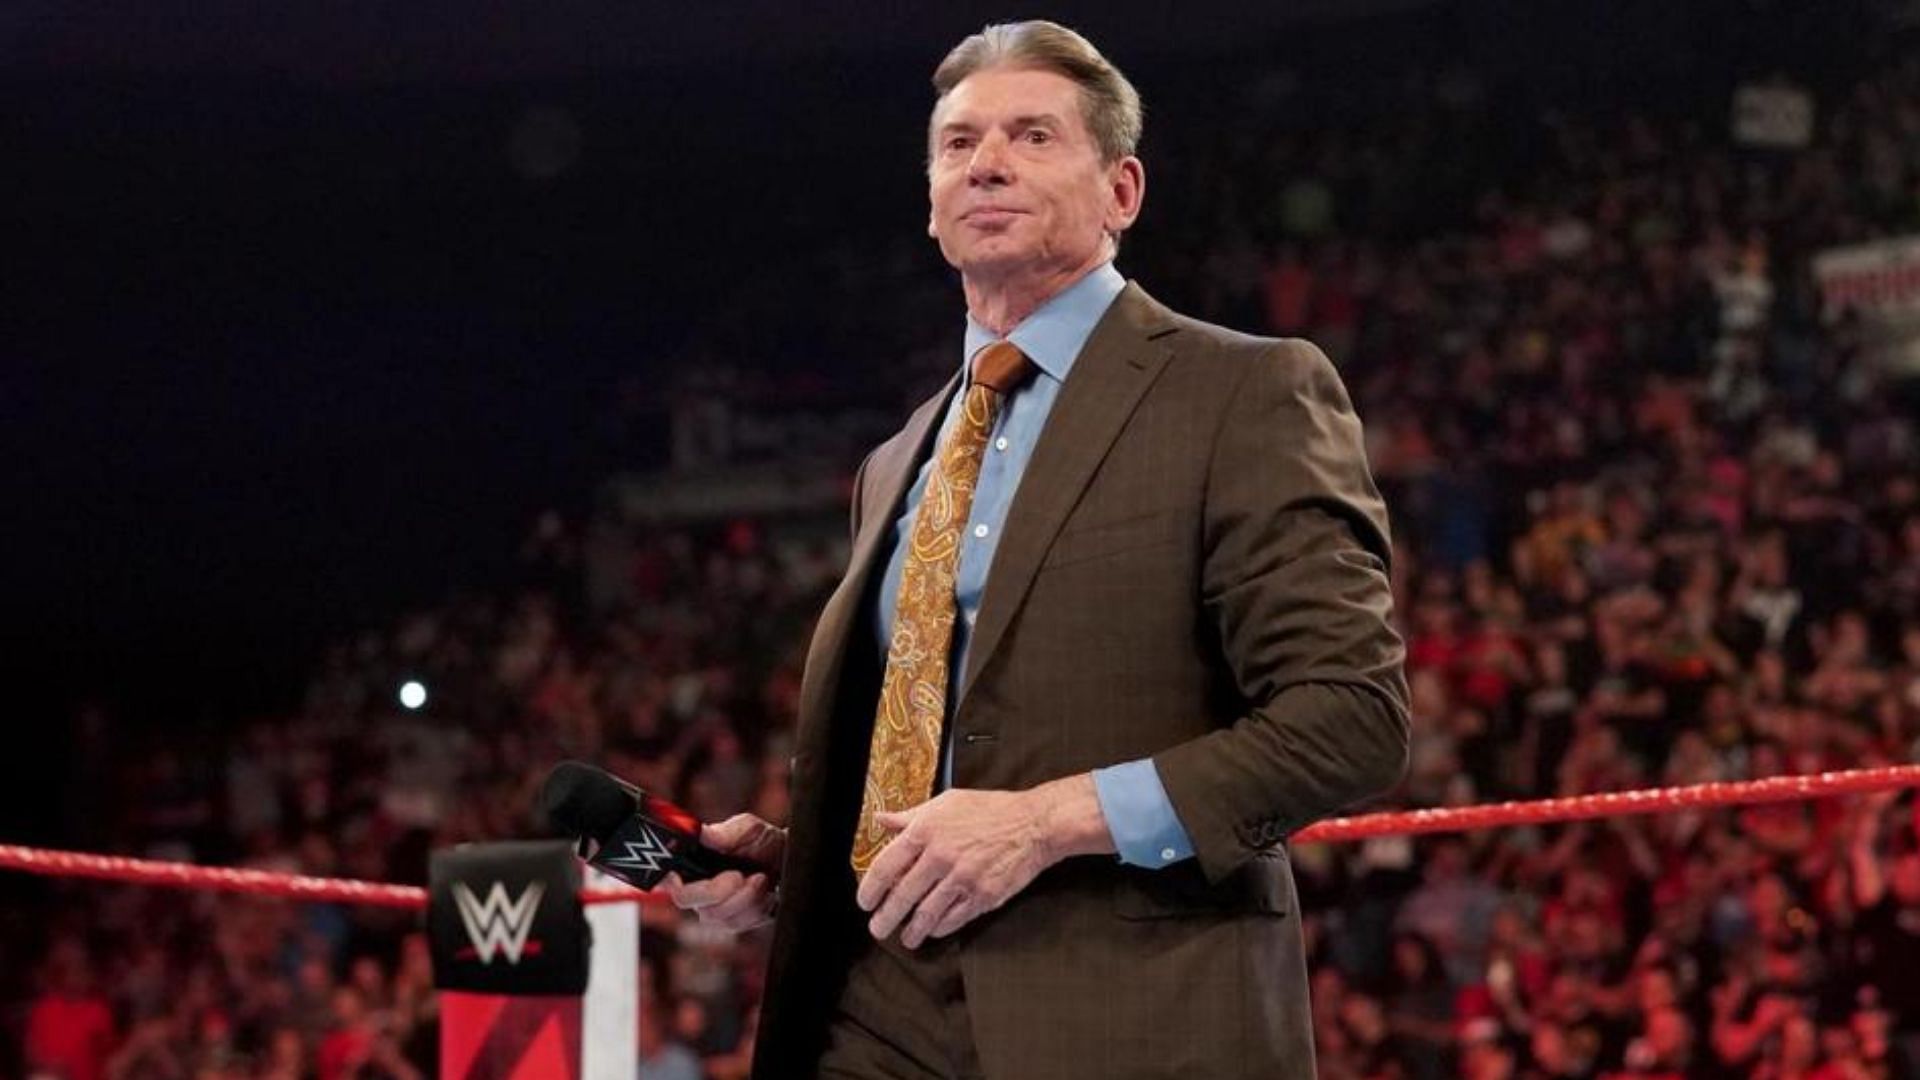 A former rival has commented on Vince McMahon&#039;s retirement